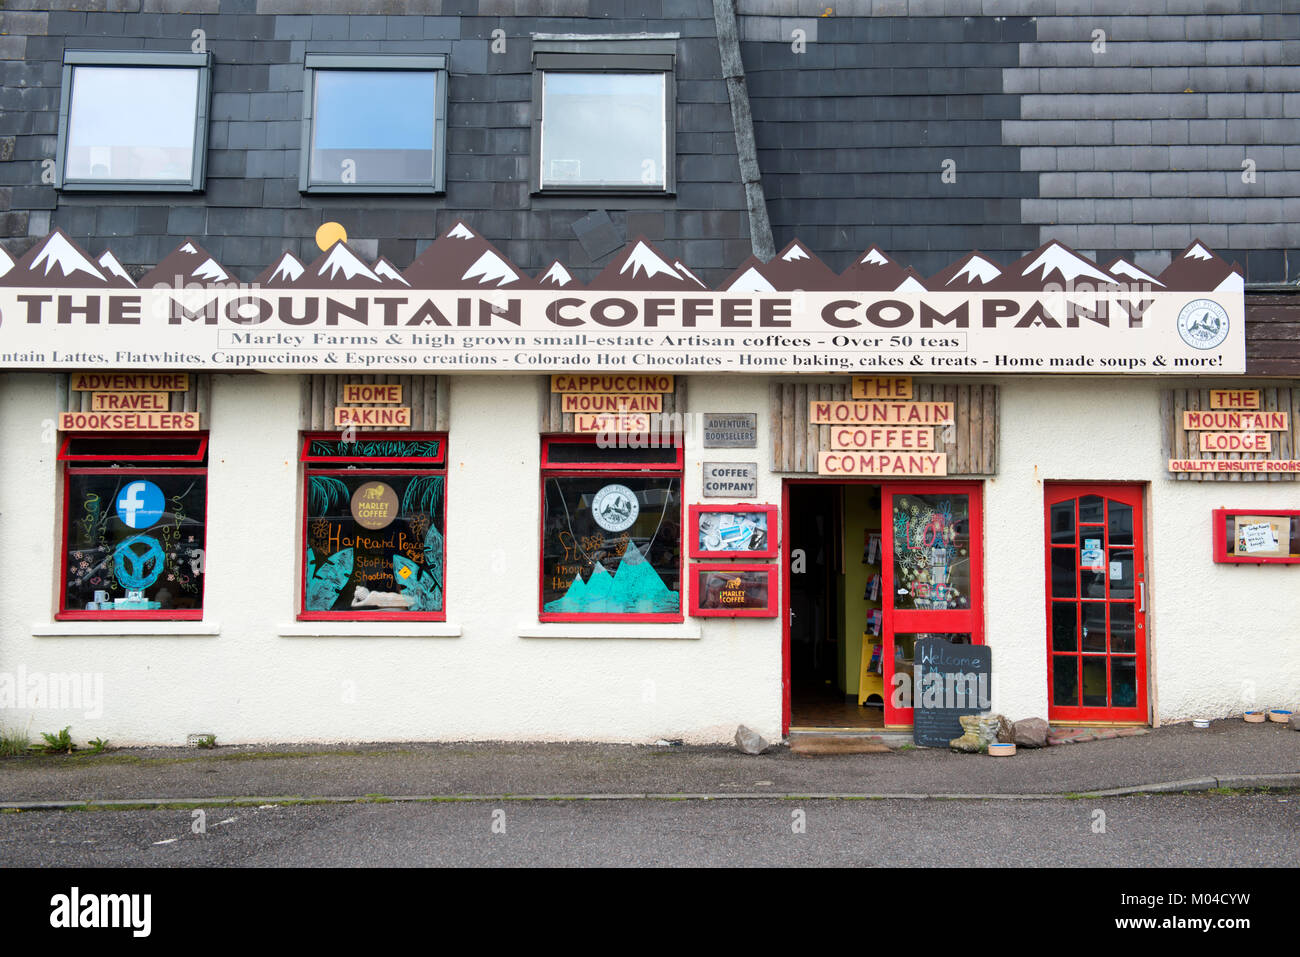 The Mountain Coffee Company coffee shop in Gairloch, Wester Ross, Scotland Stock Photo